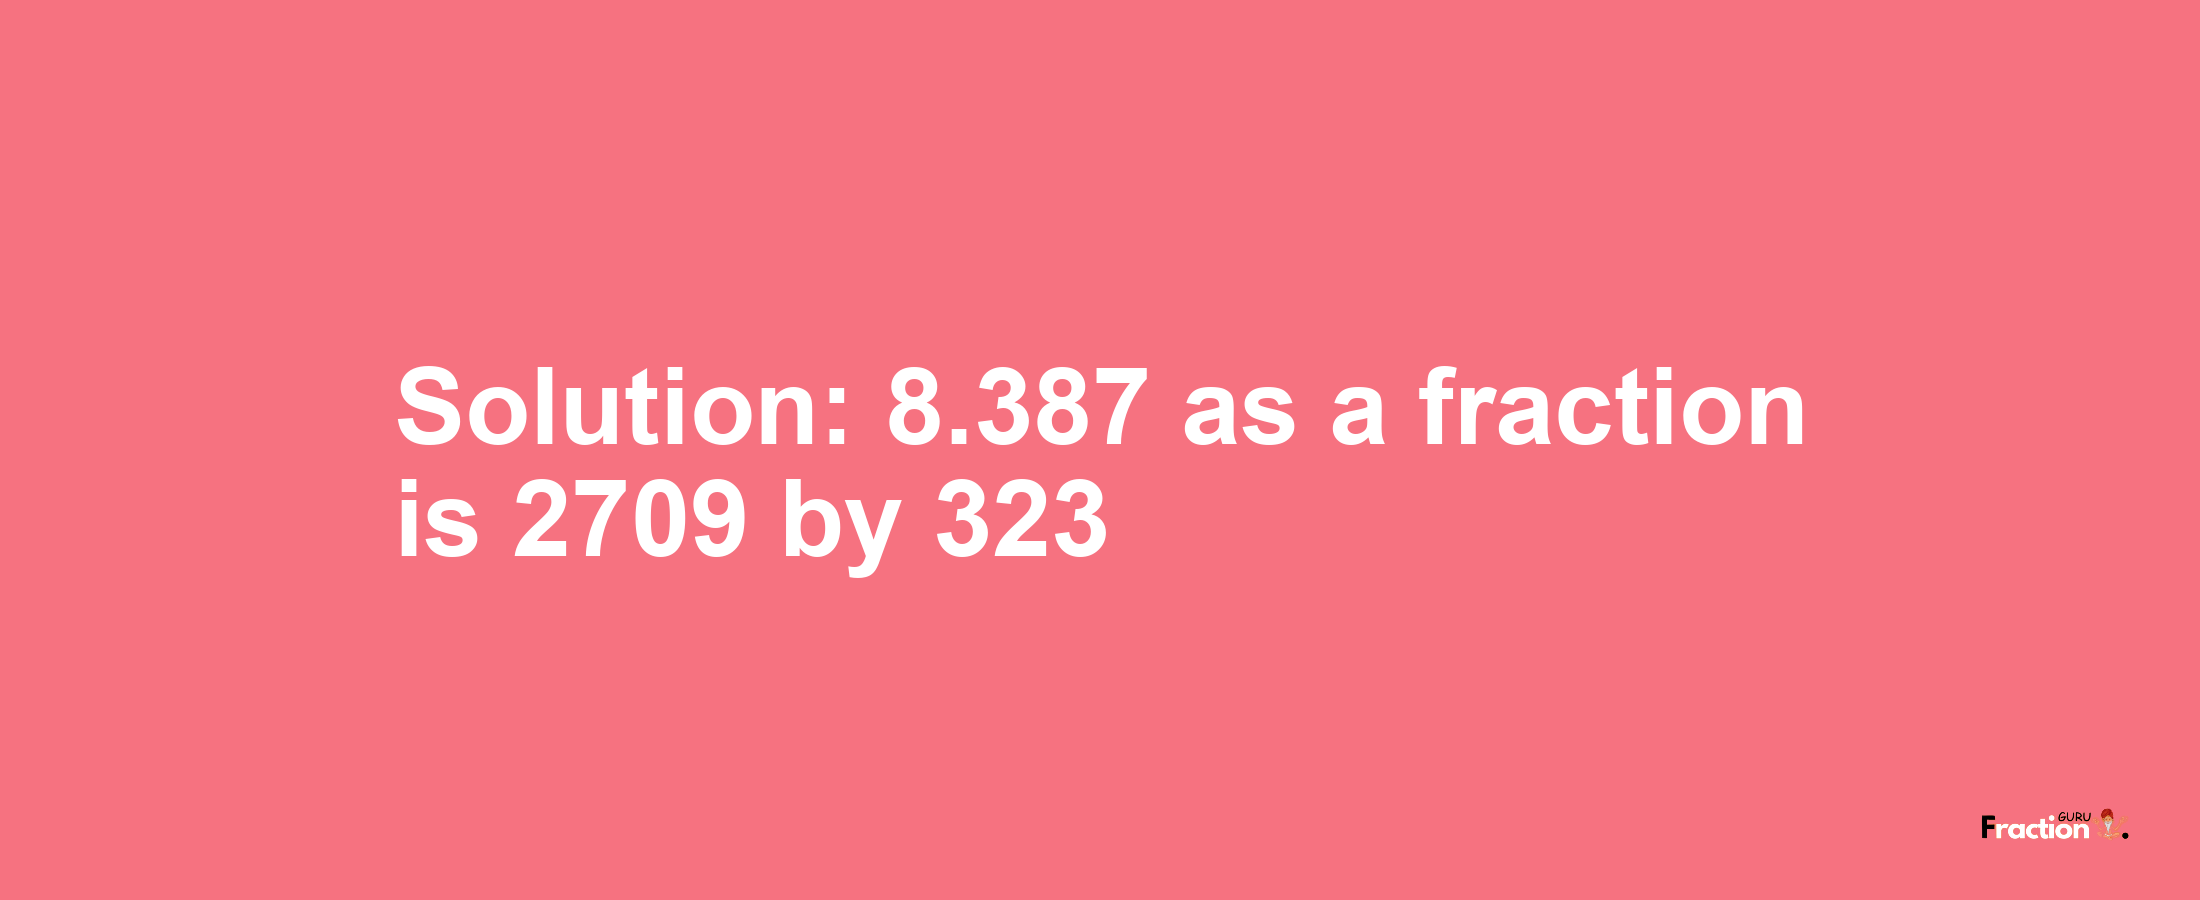 Solution:8.387 as a fraction is 2709/323